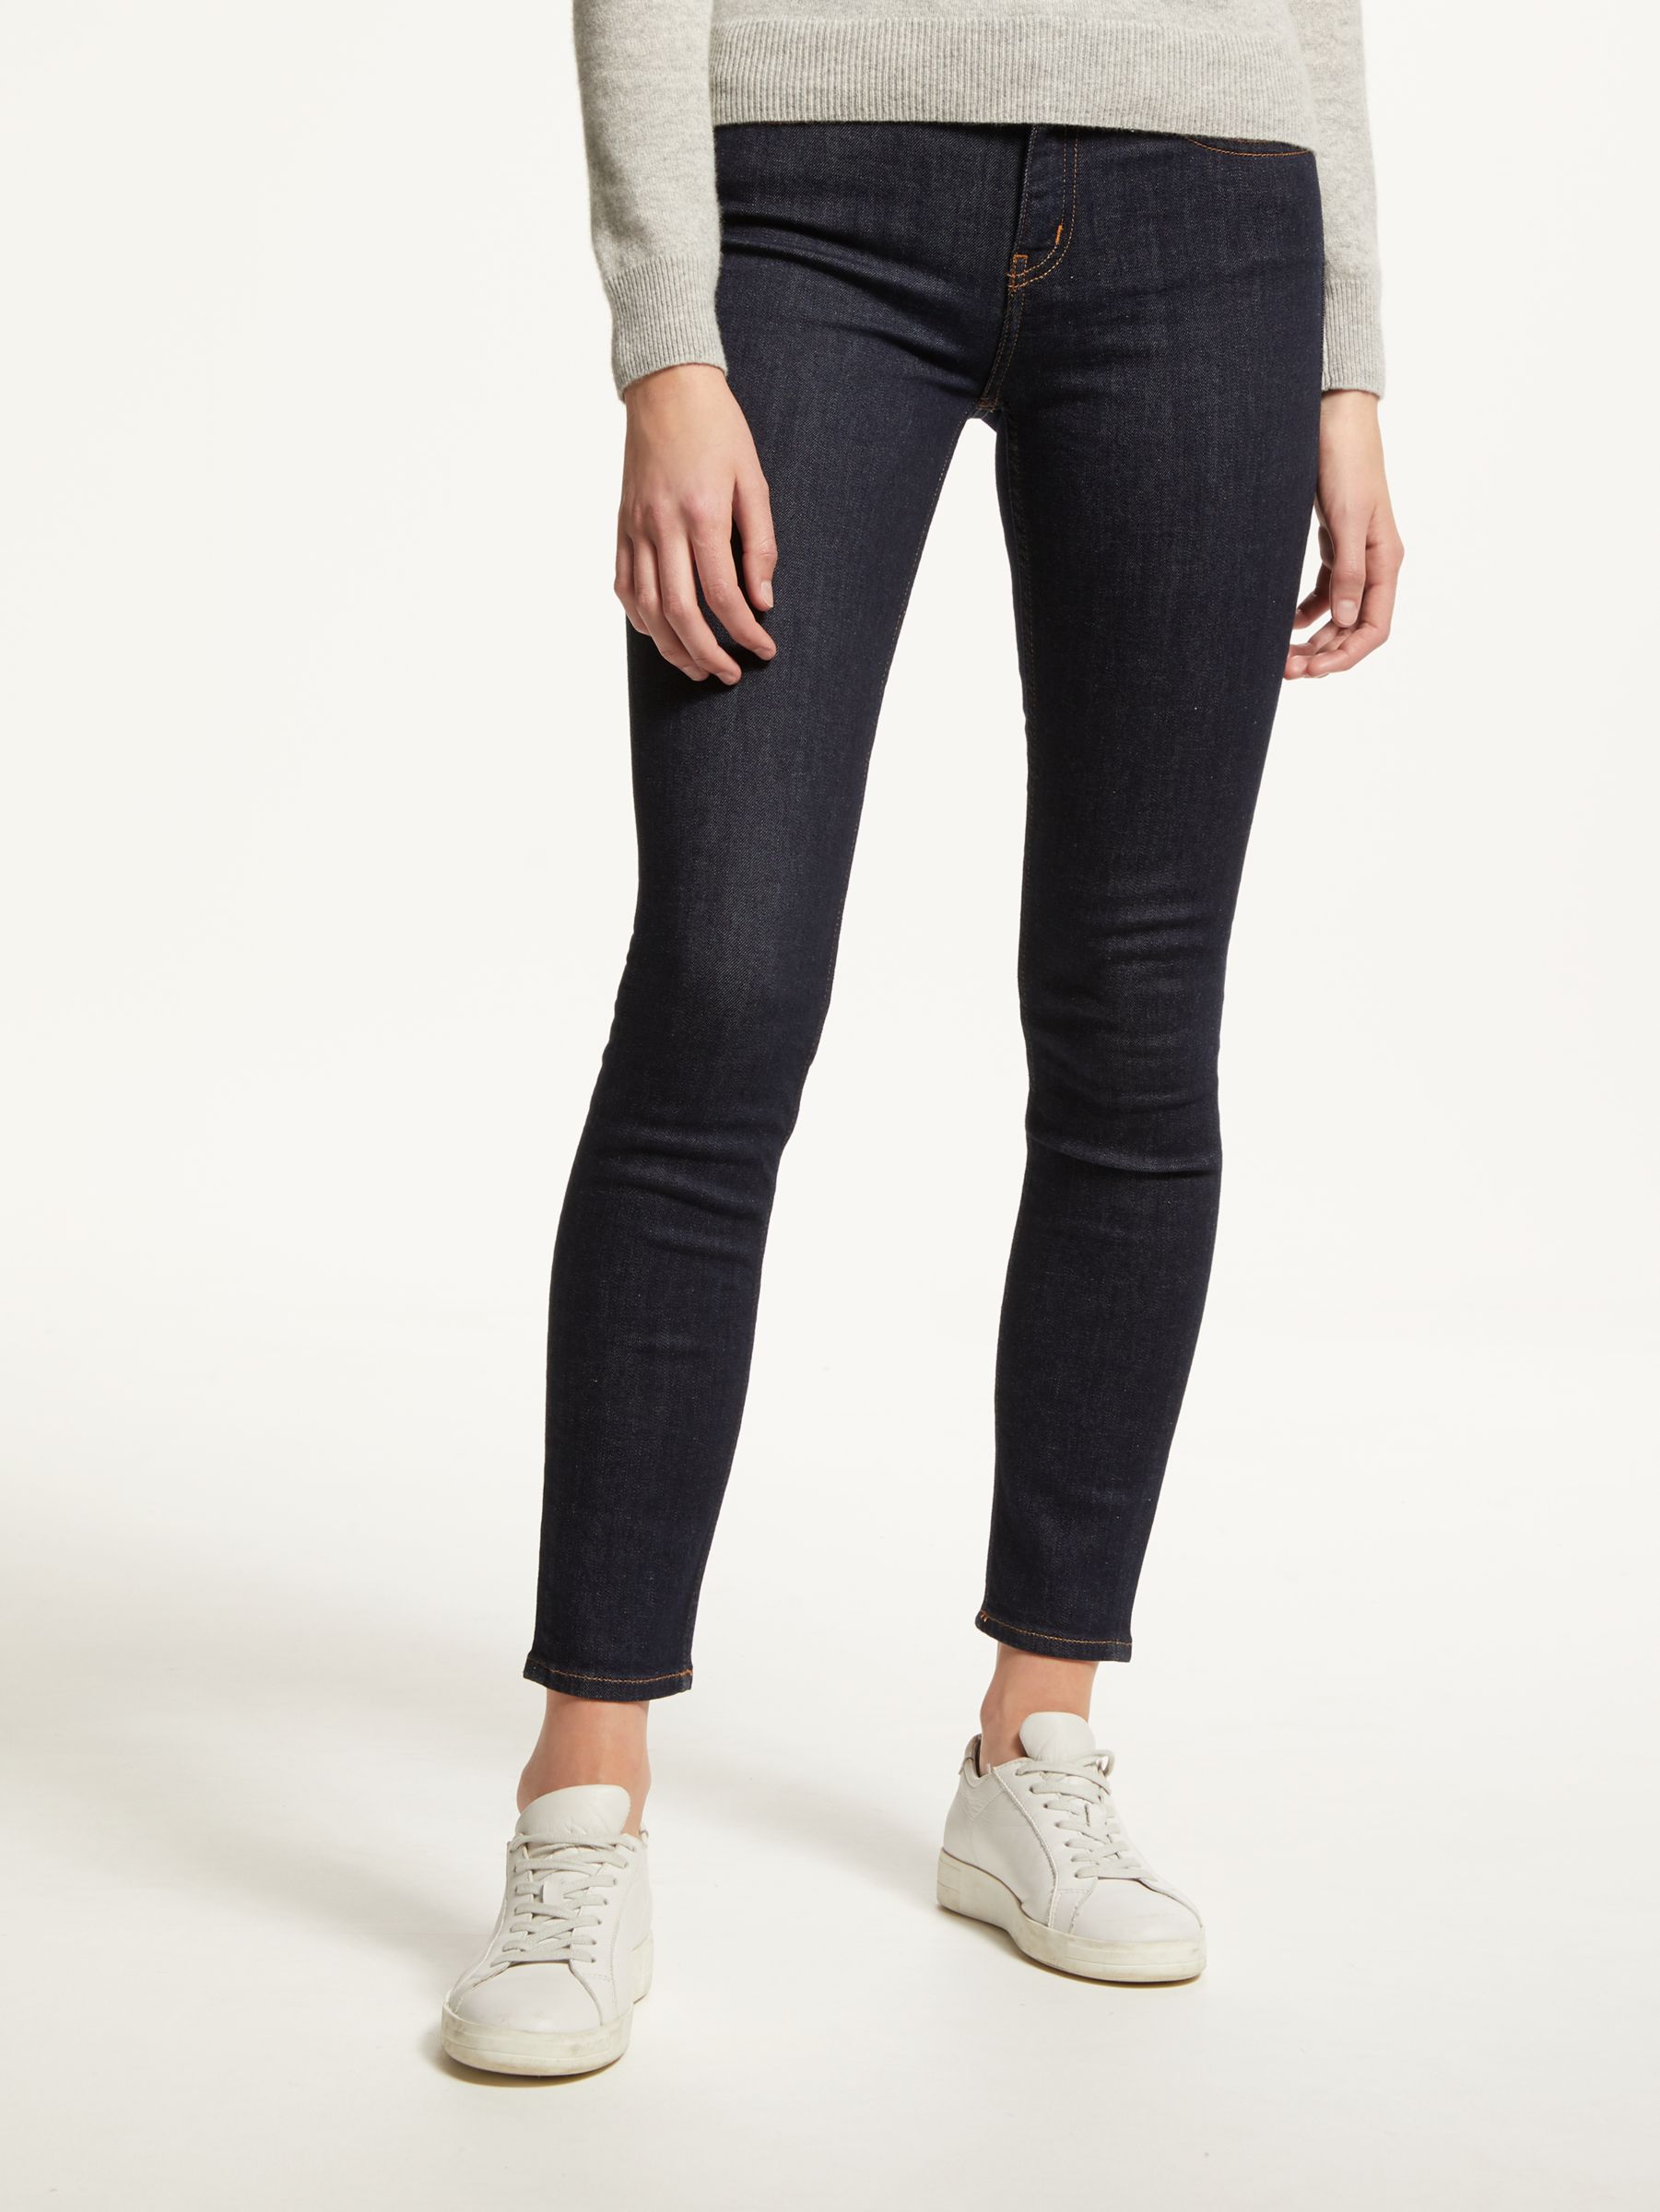 Calvin klein skinny jeans mid rise jeans How to use clothes folder